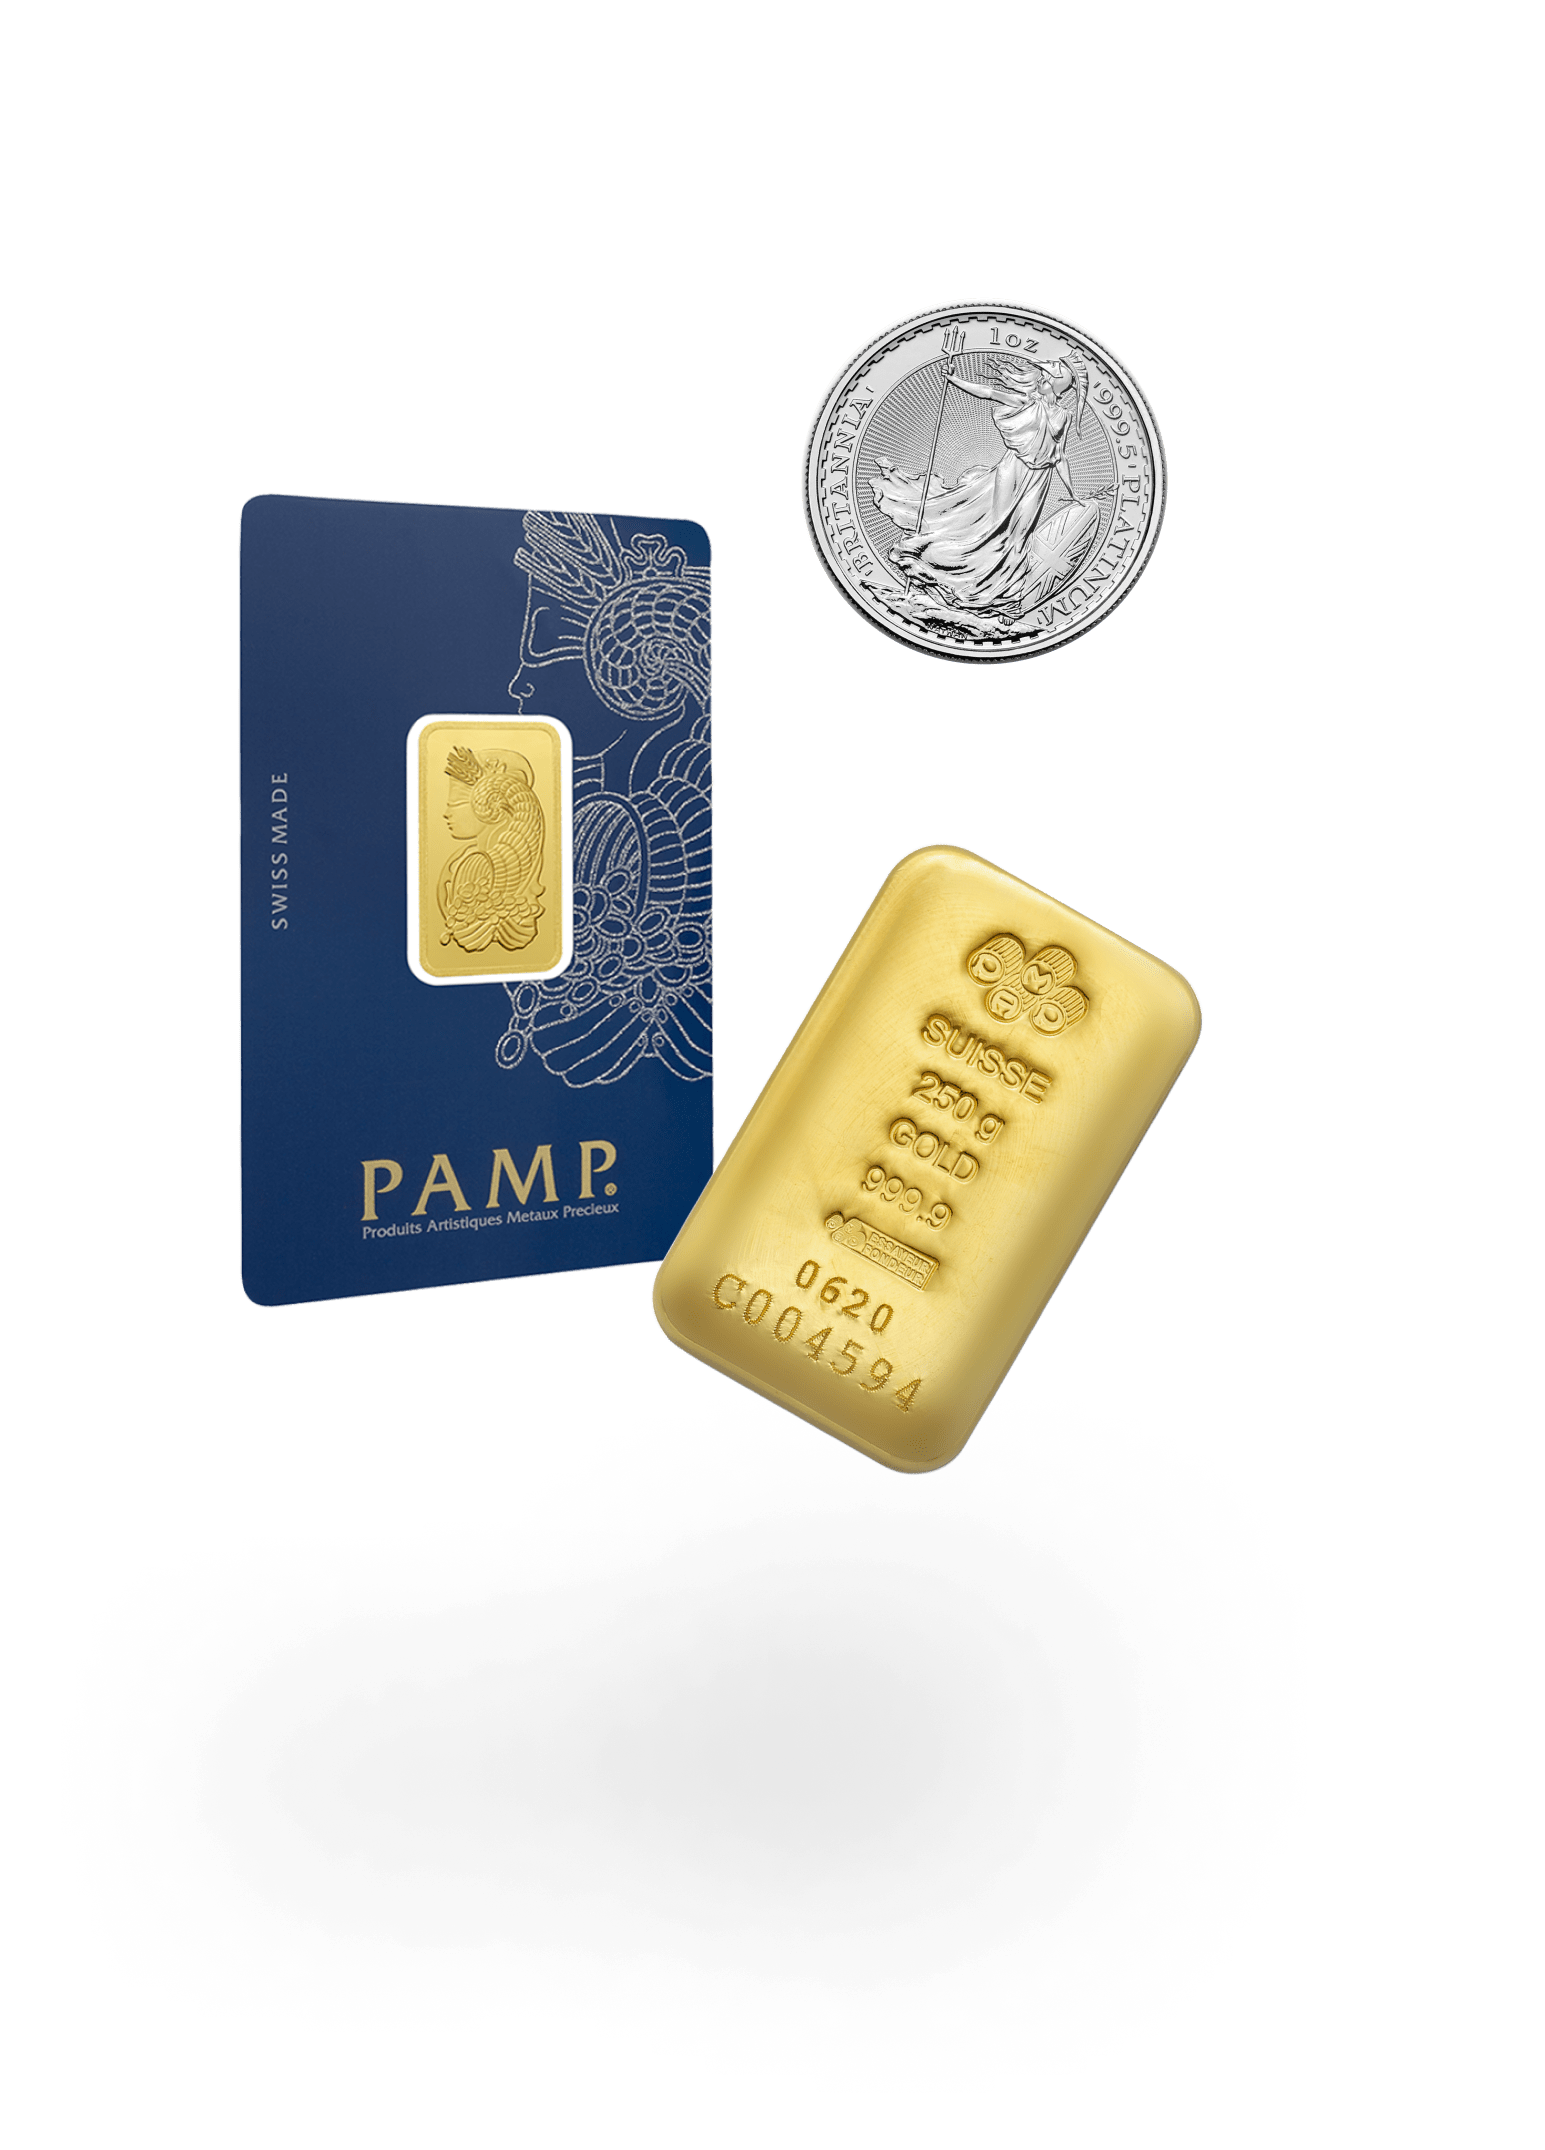 buy gold coins and bars from PAMP and reputable mints on the savings assistant like 1 kg gold bar or 1 oz britannia or 5 g lady fortuna gold bar